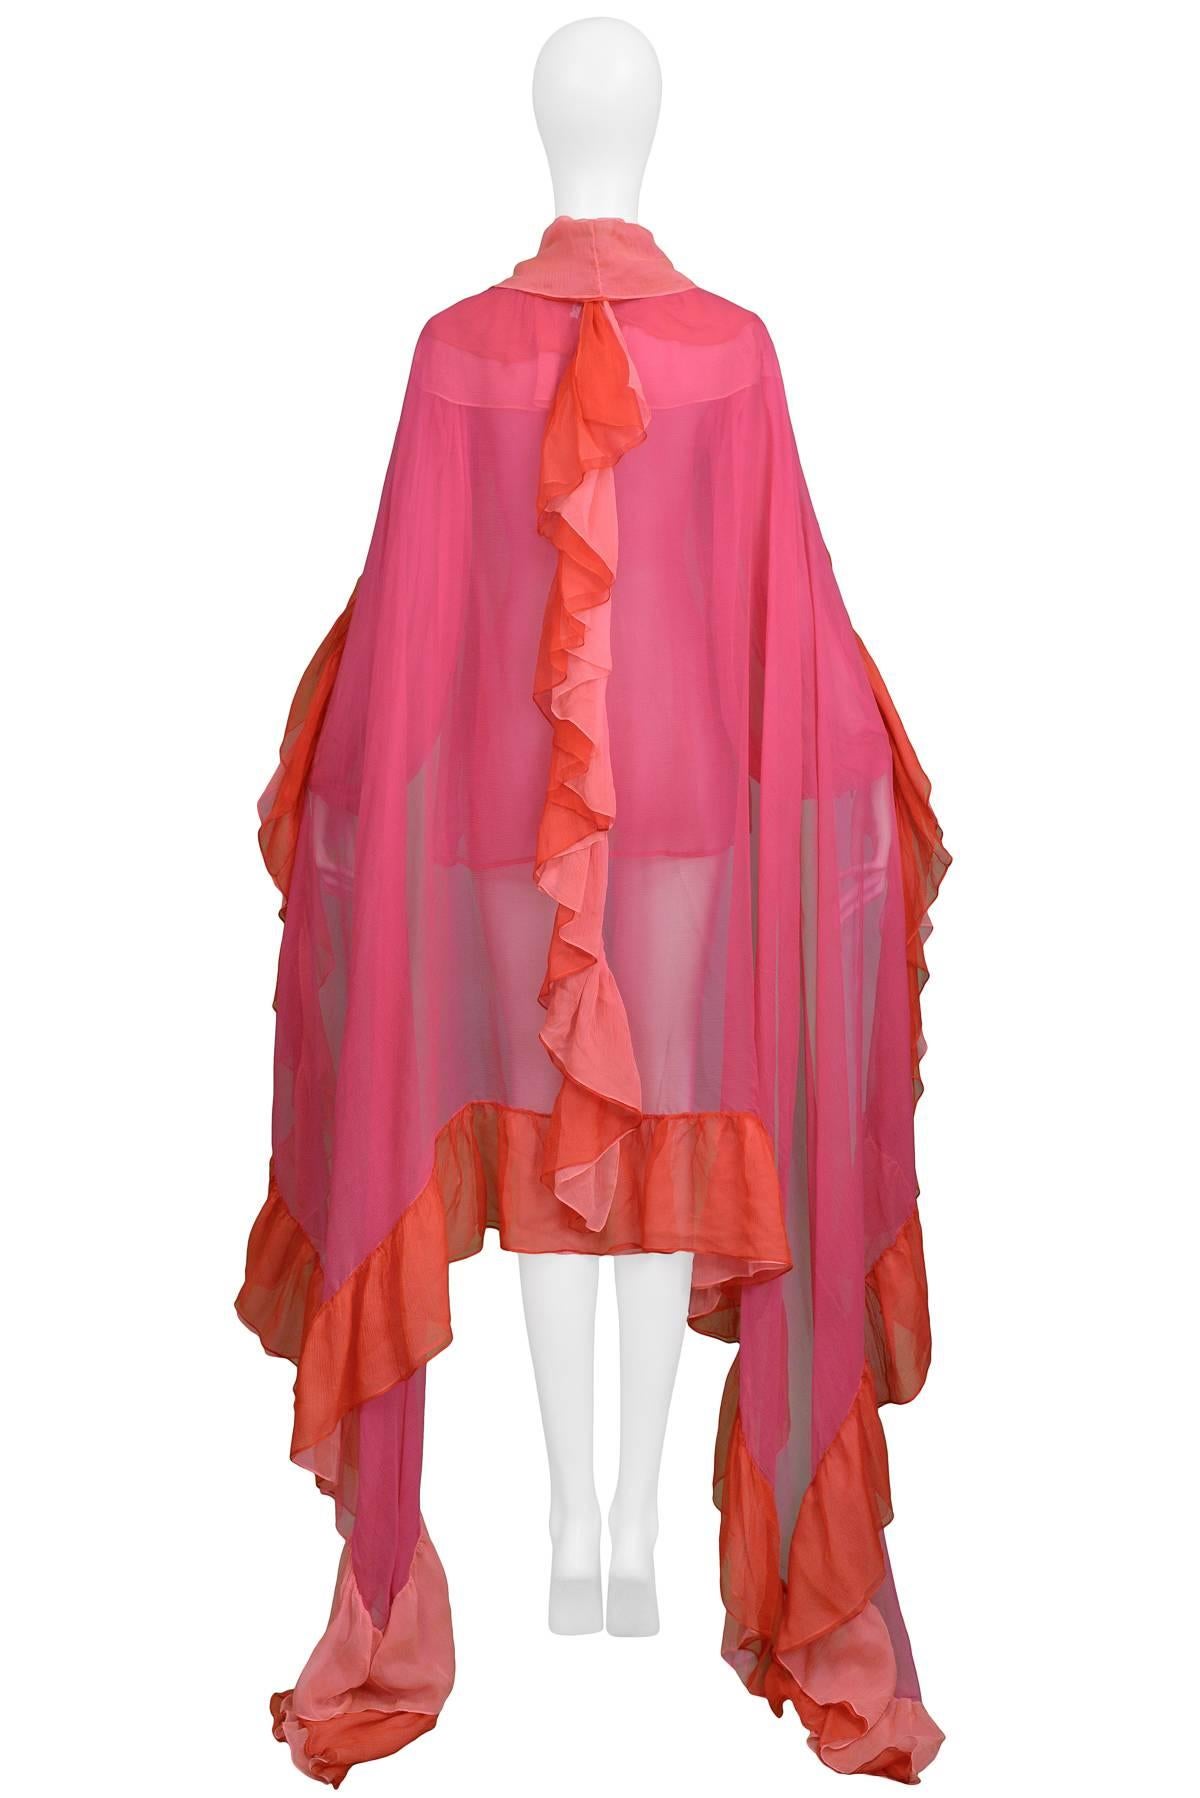 Yves Saint Laurent Hot Pink & Red Chiffon Peasant Blouse & Giant Ruffle Scarf 1